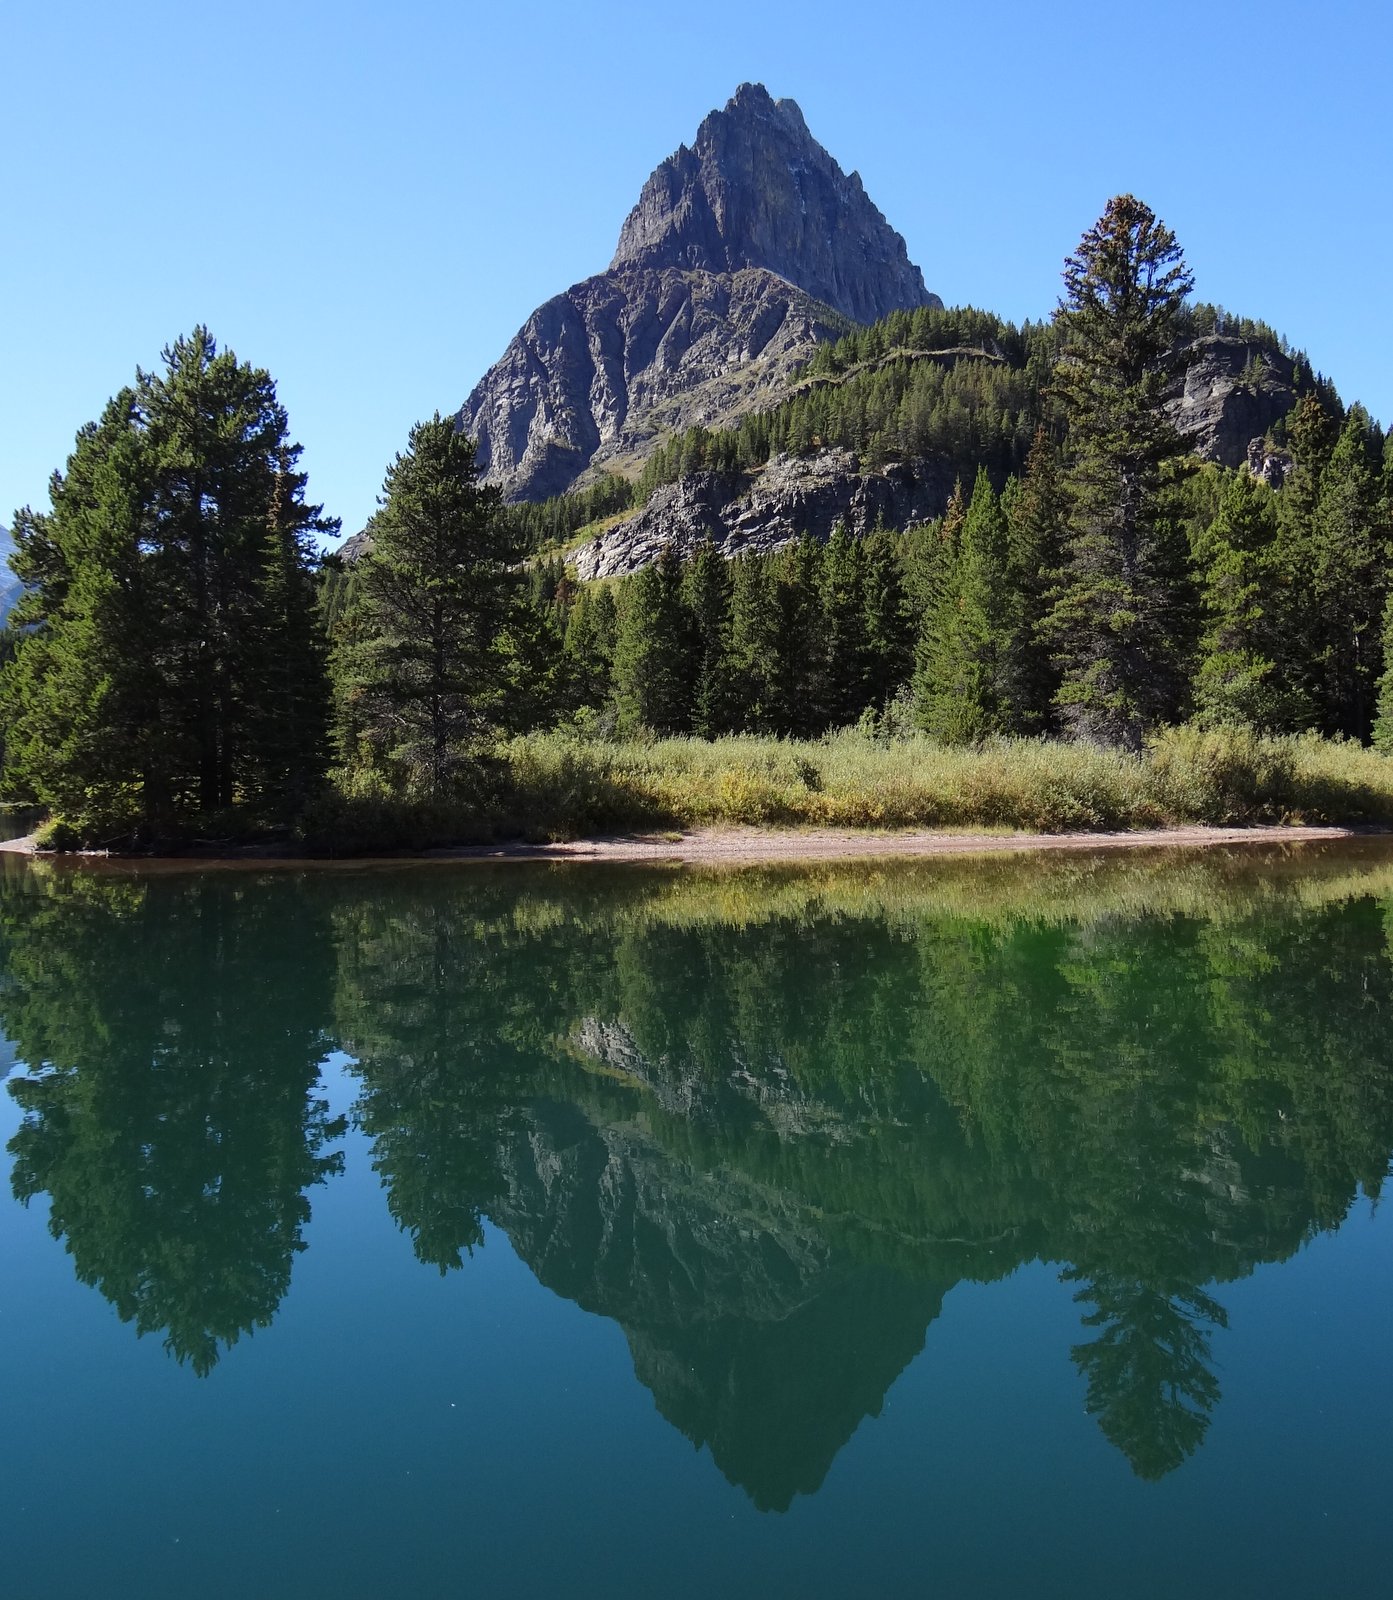 Mountain under a blue sky with a mirror image reflected in a lake